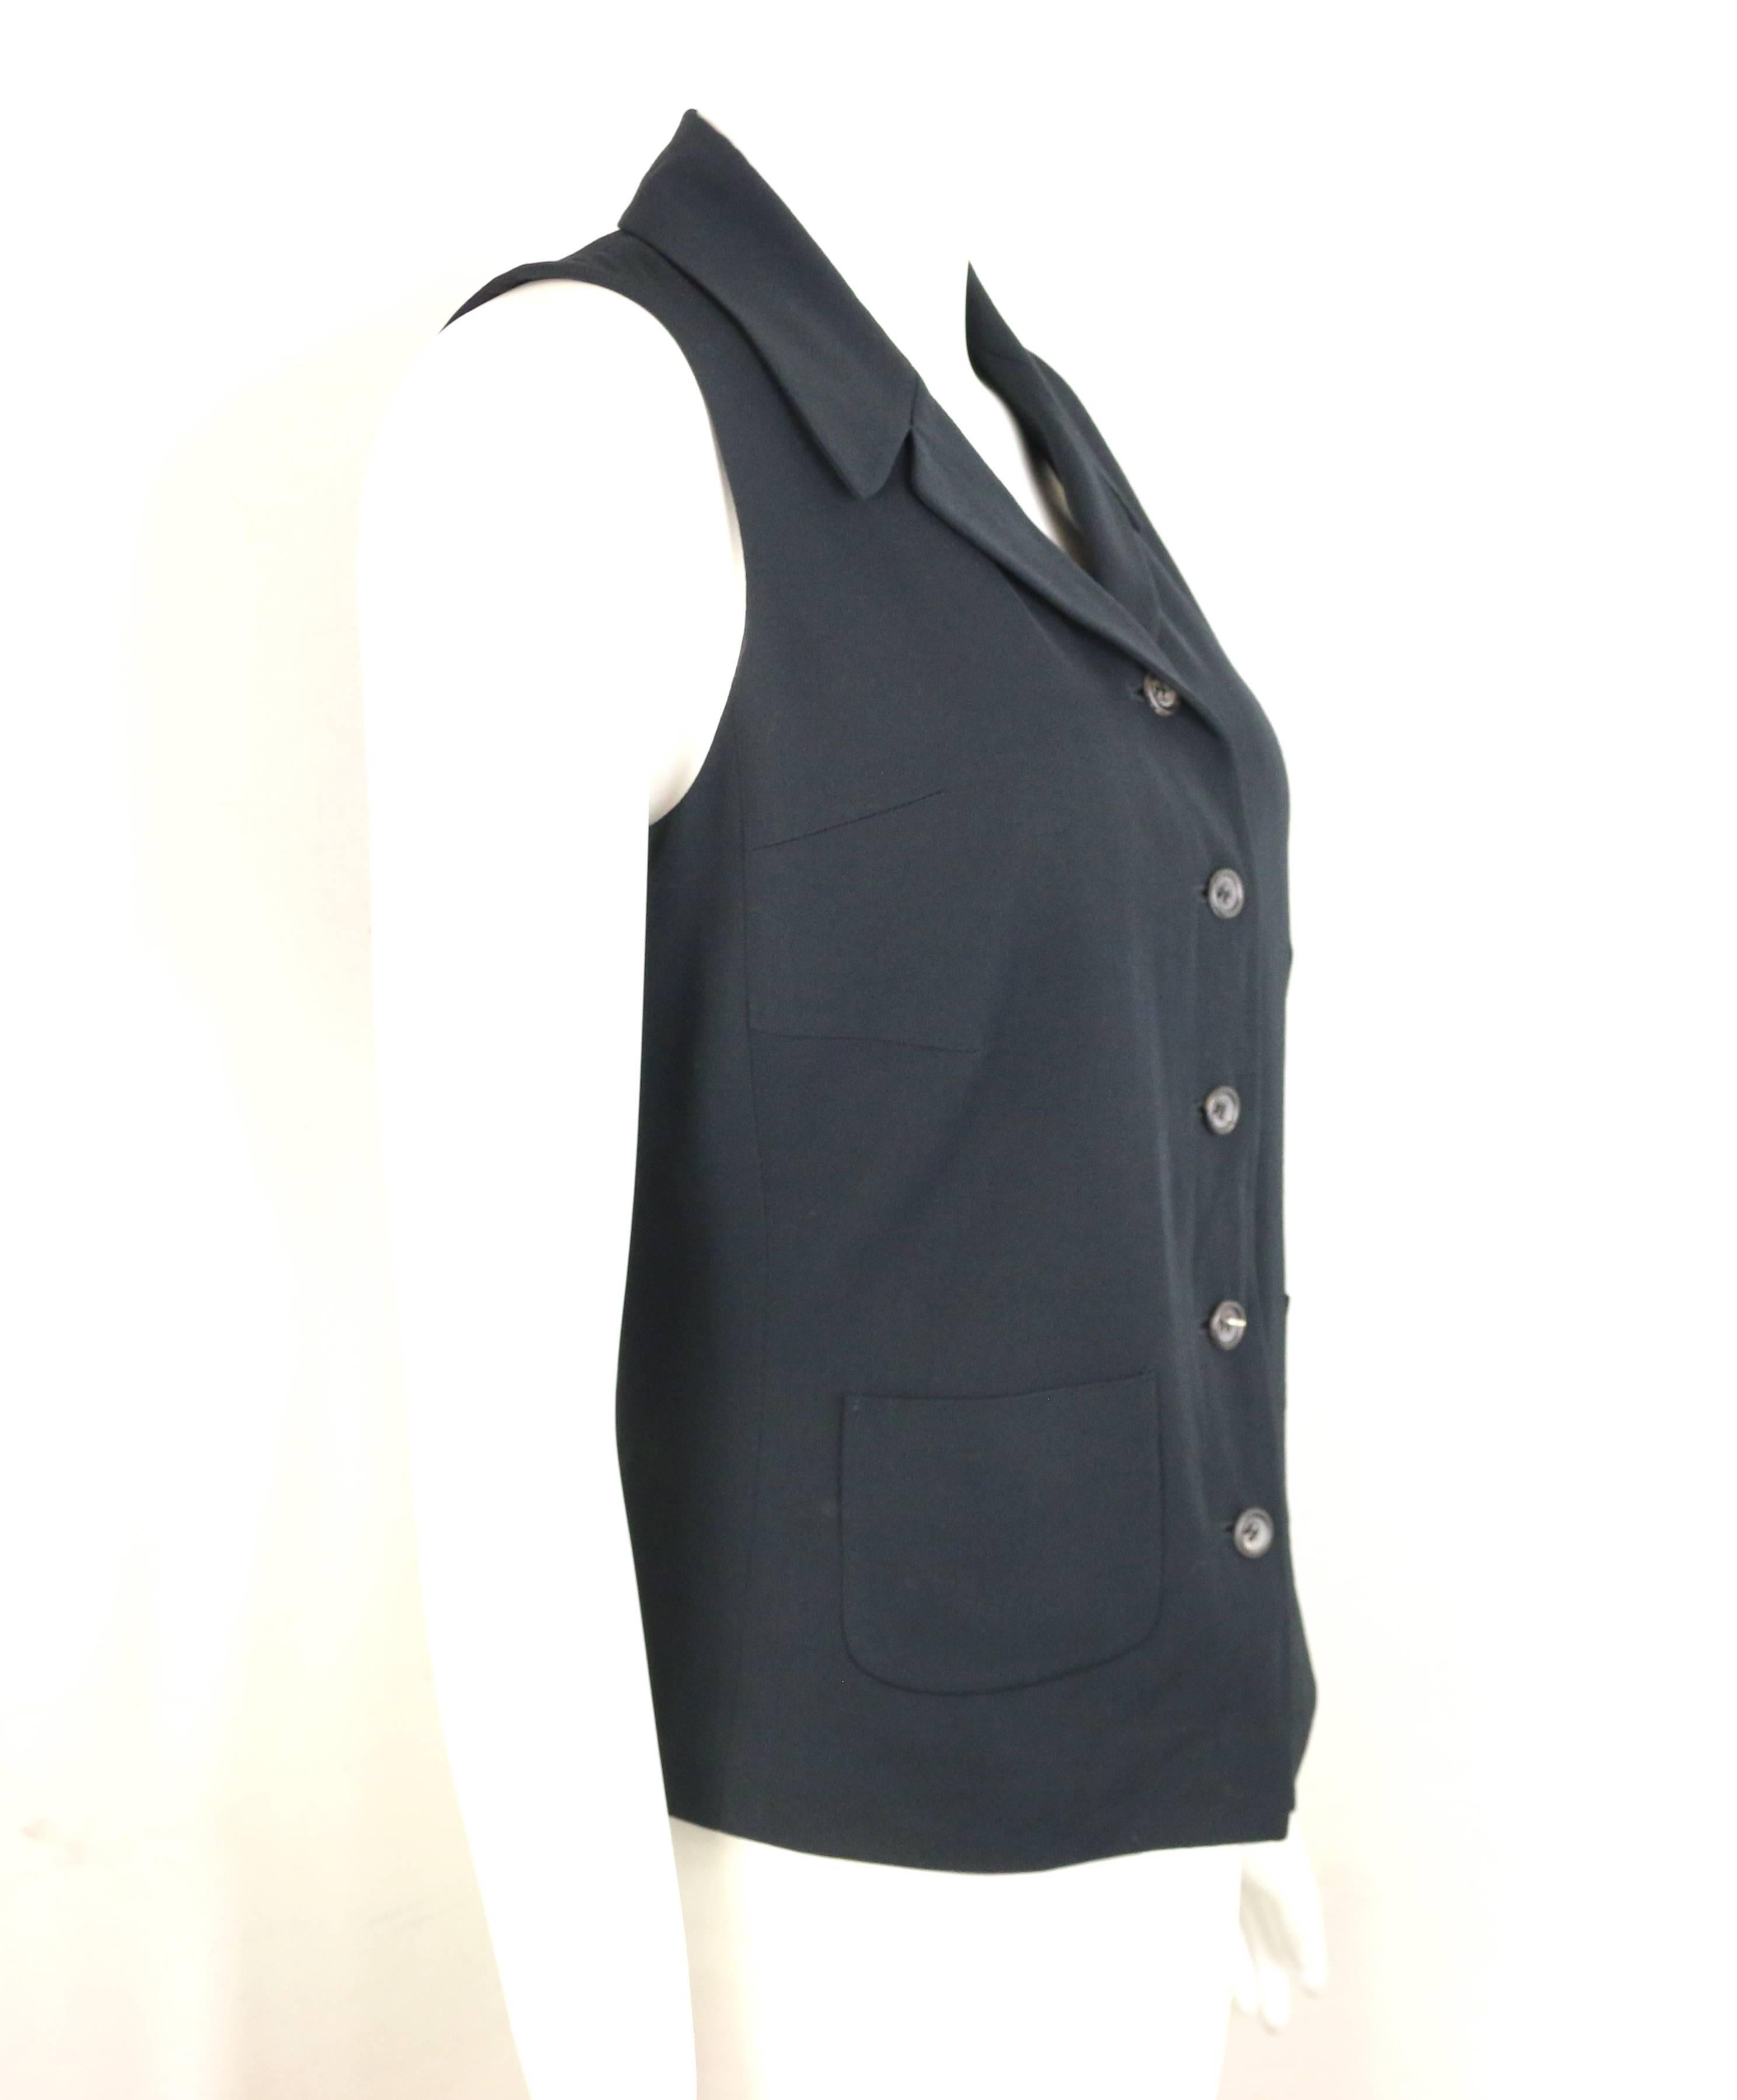 - Vintage 90s Jil Sander black viscose and wool vest. 

- Featuring a notch lapel, button closure, and two front open pockets. 

- Size 36. 

- 52% Viscose, 48% Wool. Lining: 100% Cuppo. 
